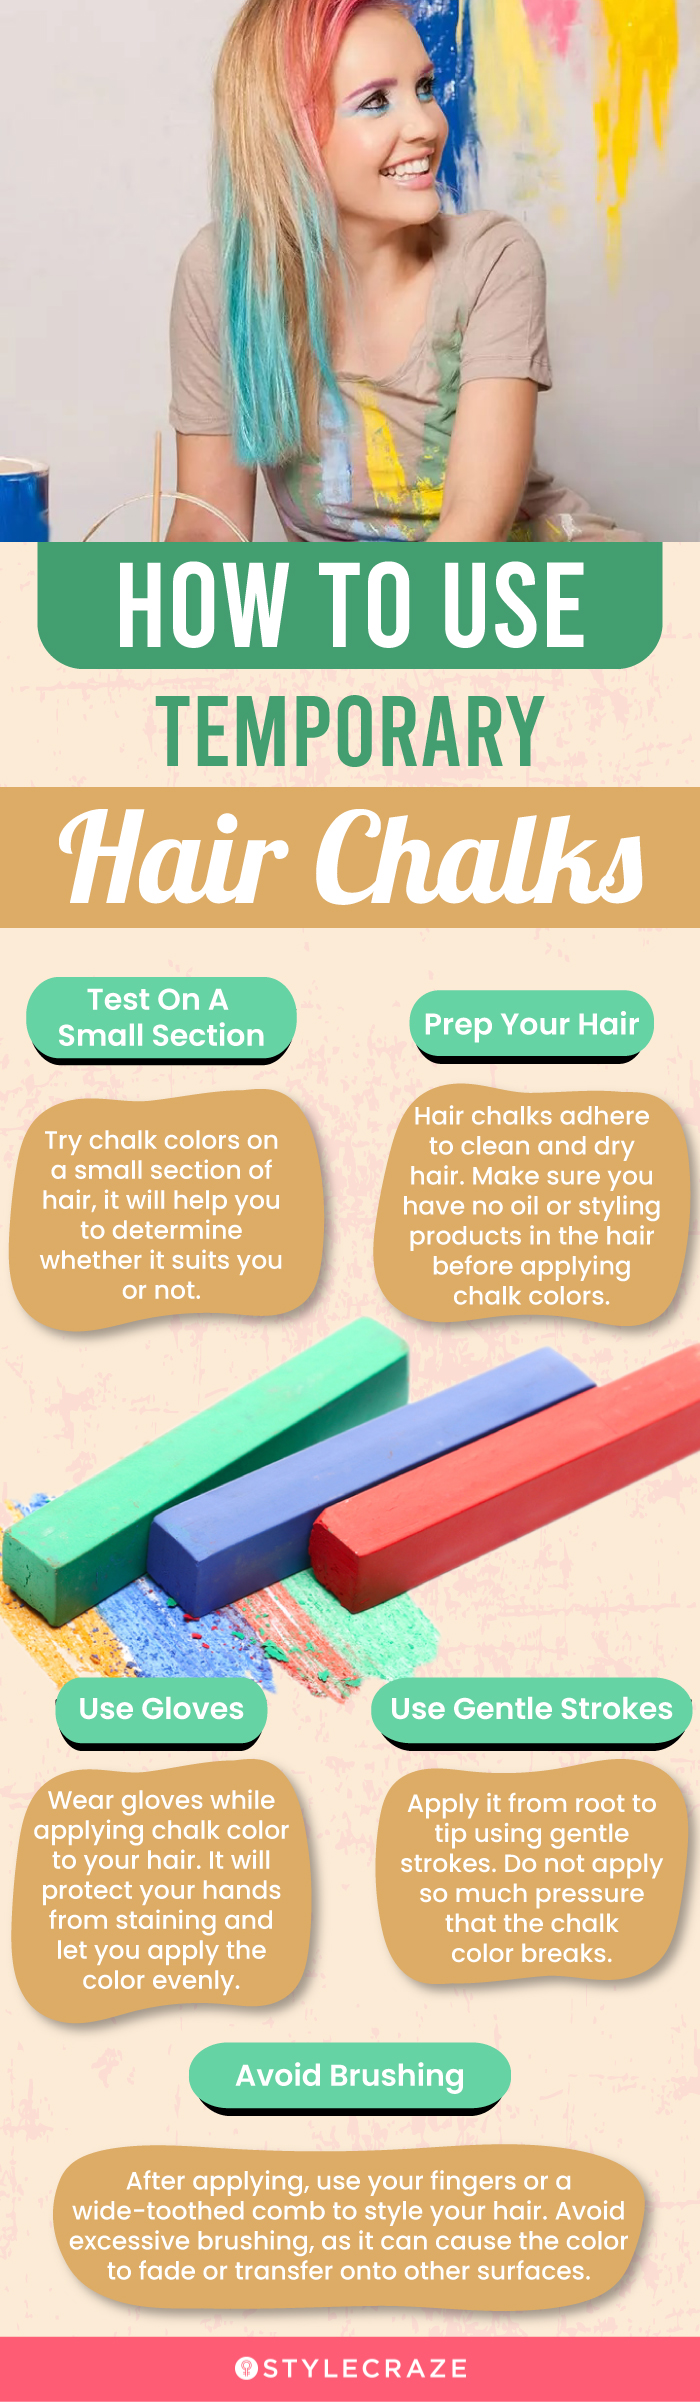 How To Use Temporary Hair Chalks (infographic)